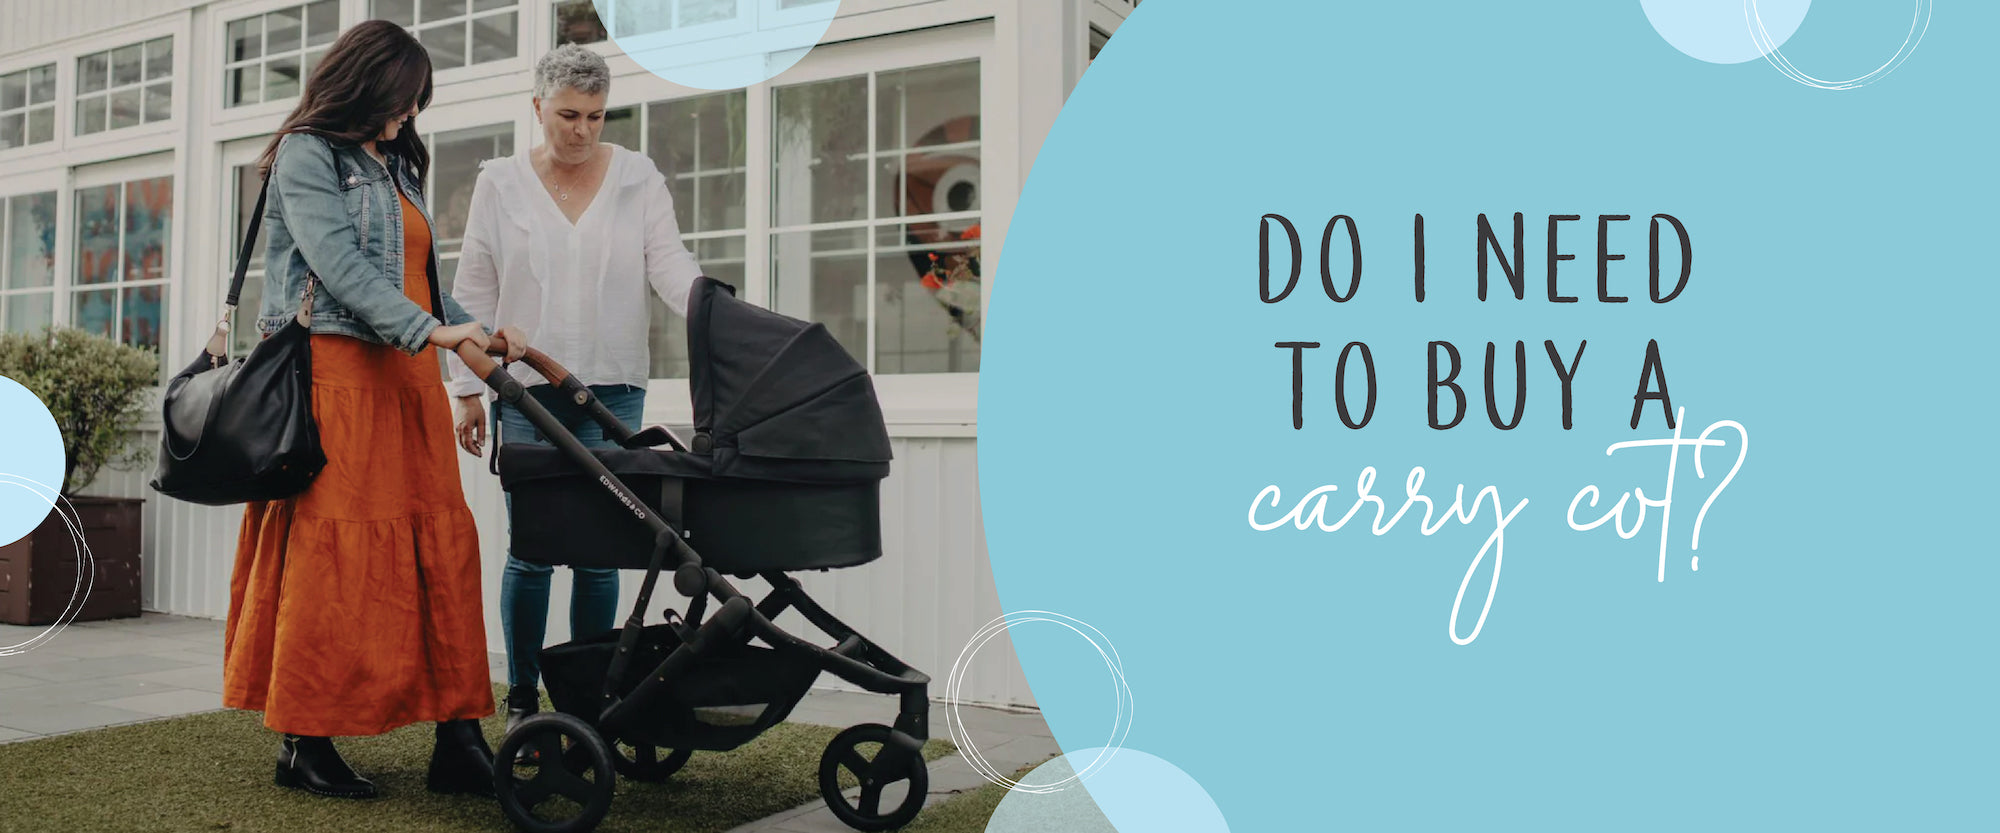 Do I need to buy a carry cot?